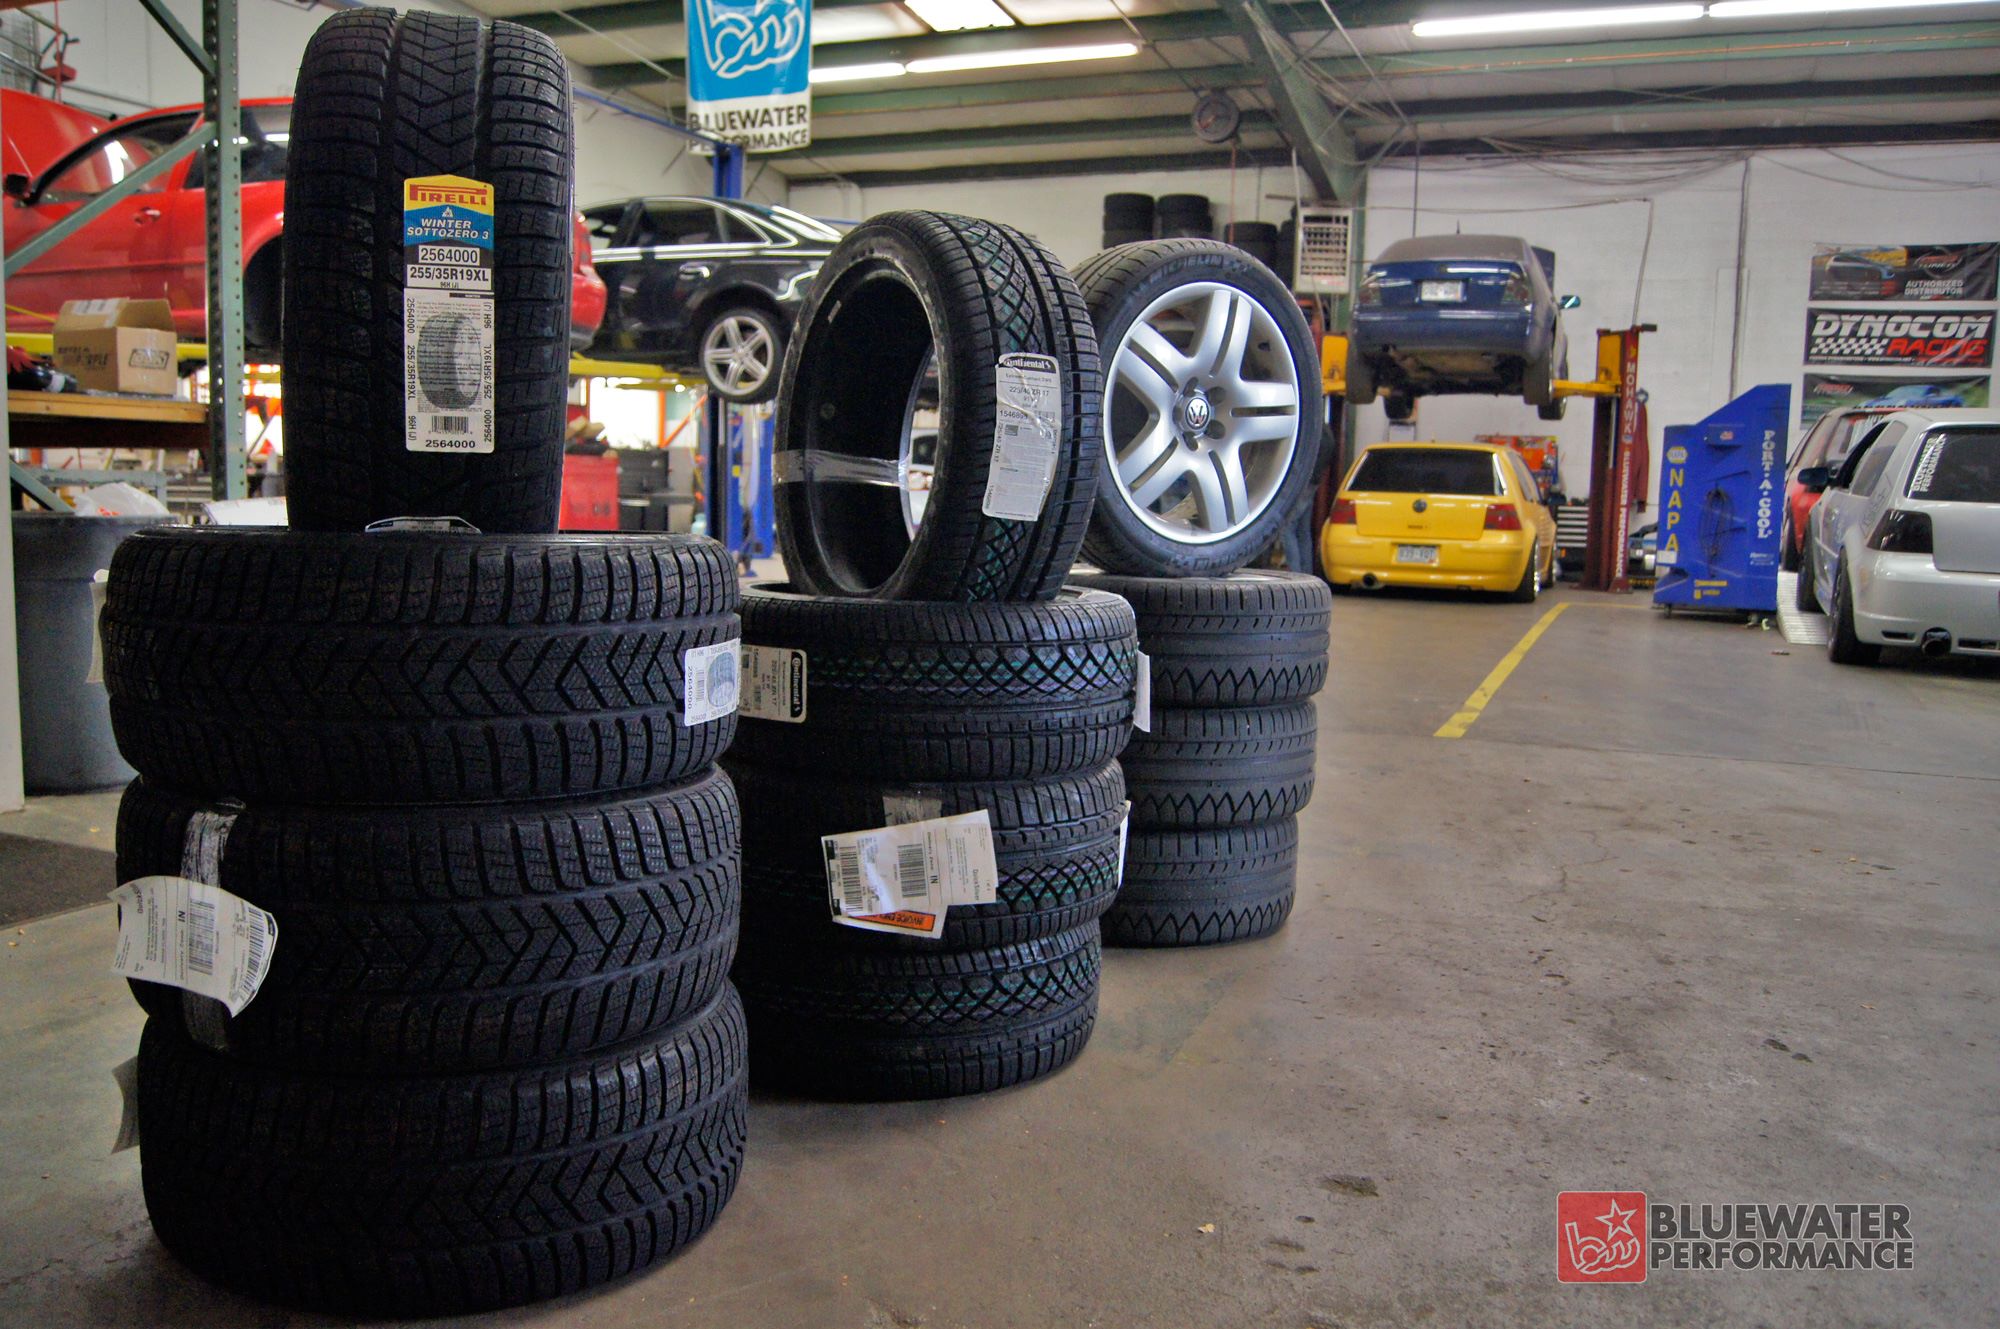 Full range of BMW tires with the best models for different seasons